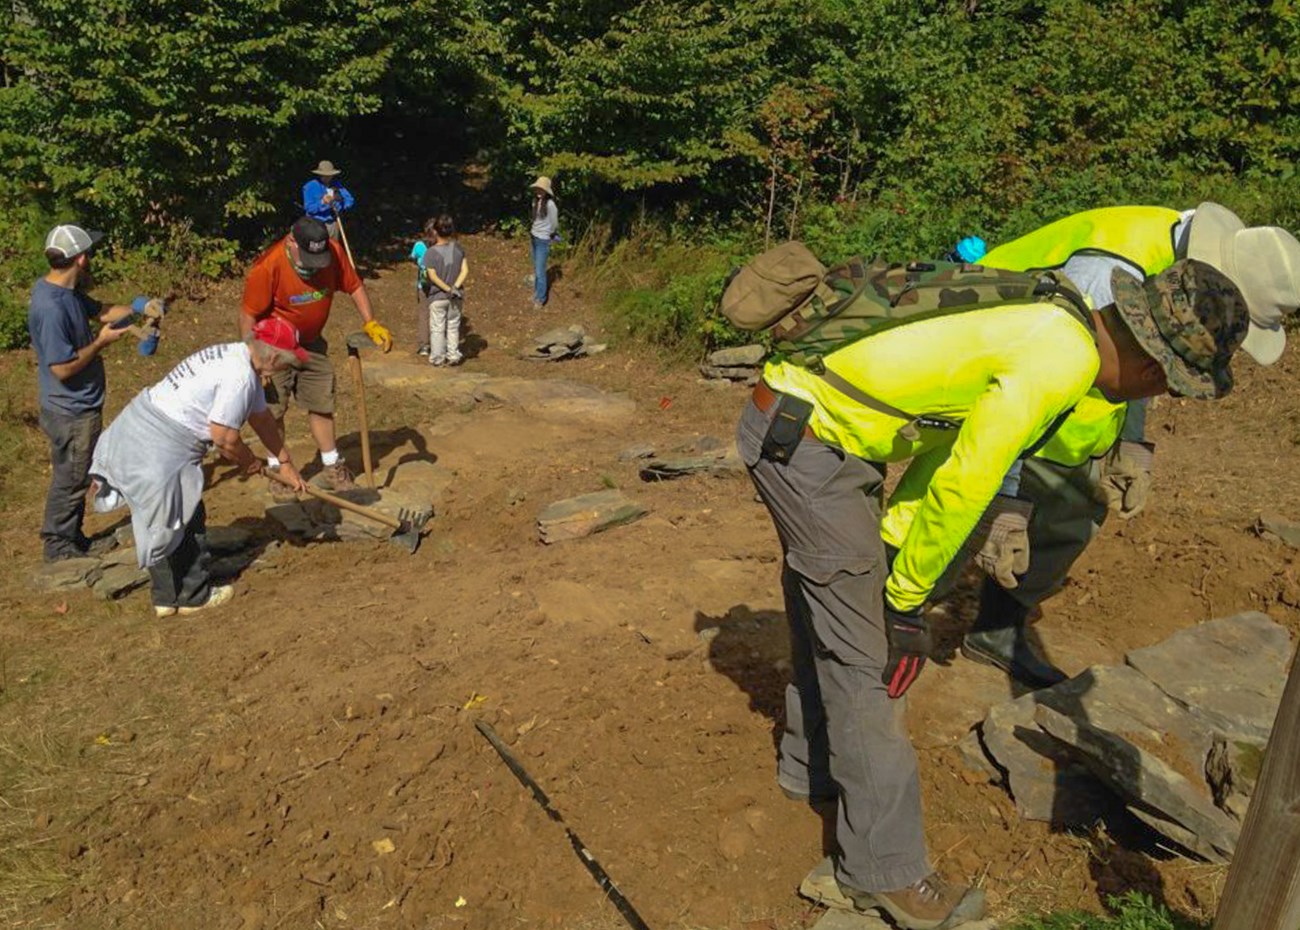 Volunteers work on installing stone steps on an earthen slope of the trail.